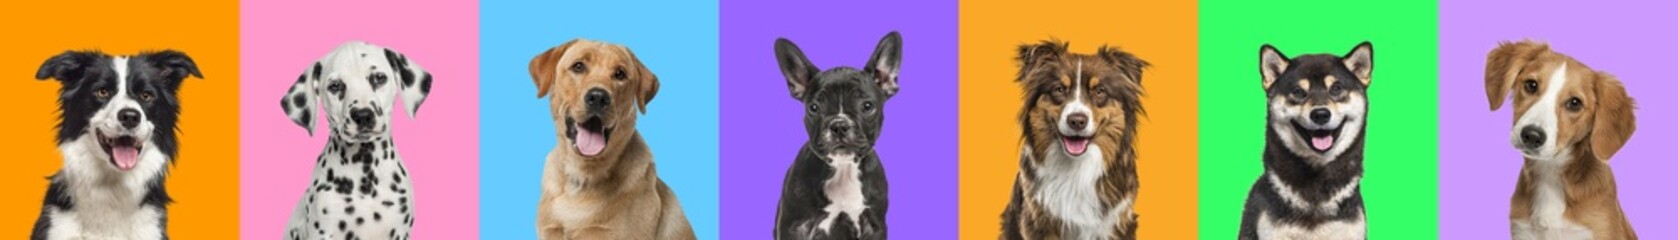 Banner, Collage of multiple dogs head portrait photos on a multicoloured background of a multitude of different bright colours.